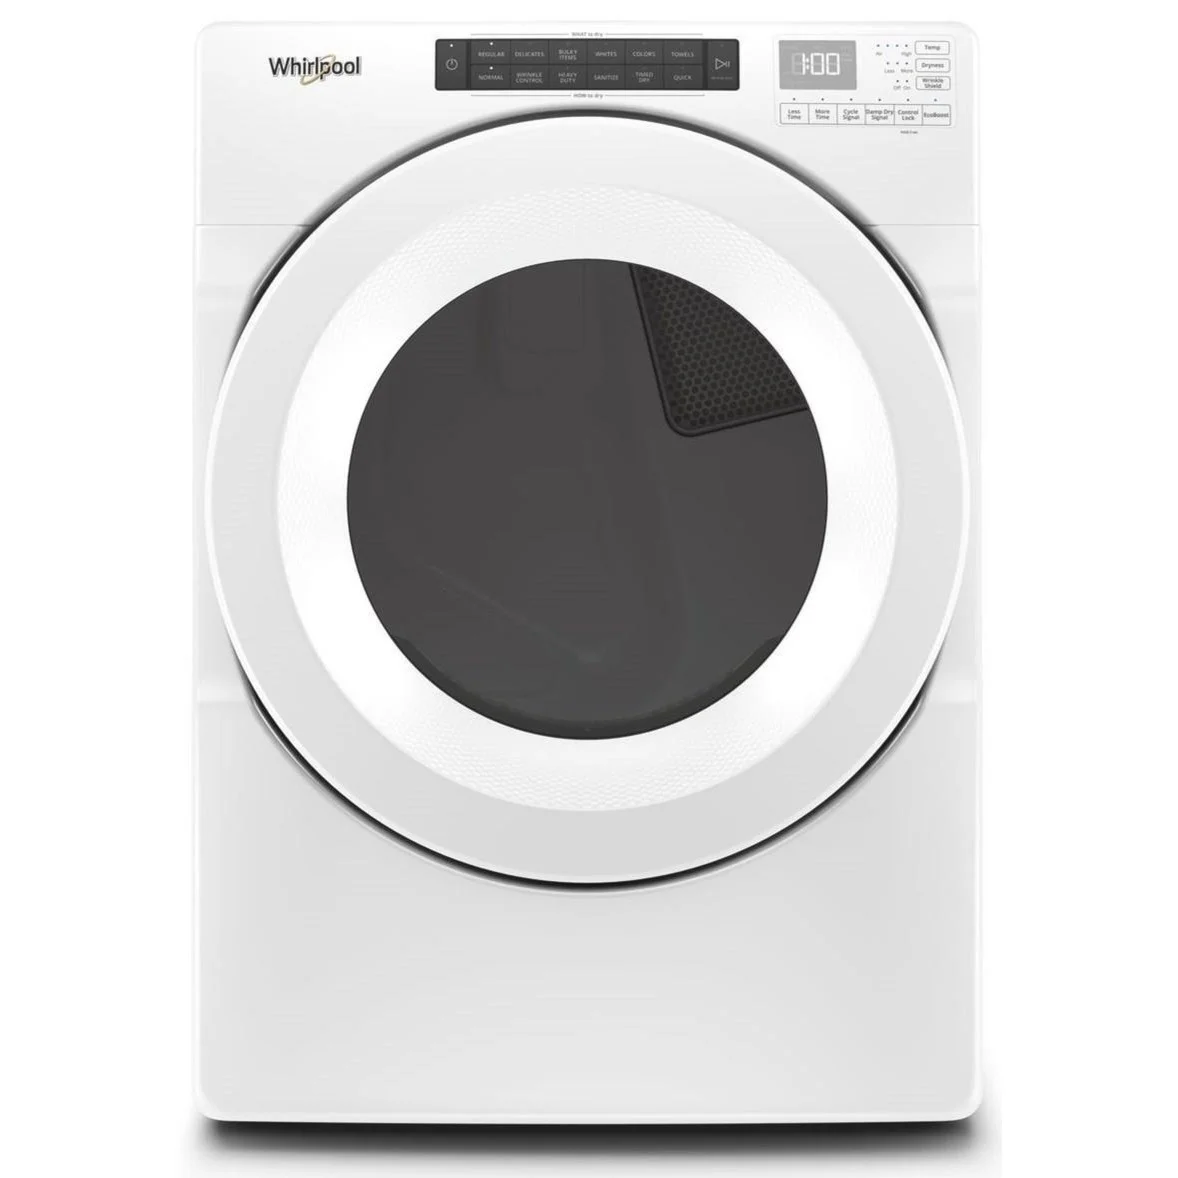 whirlpool-wgd5620hw-7-4-cu-ft-front-load-gas-dryer-with-intuitive